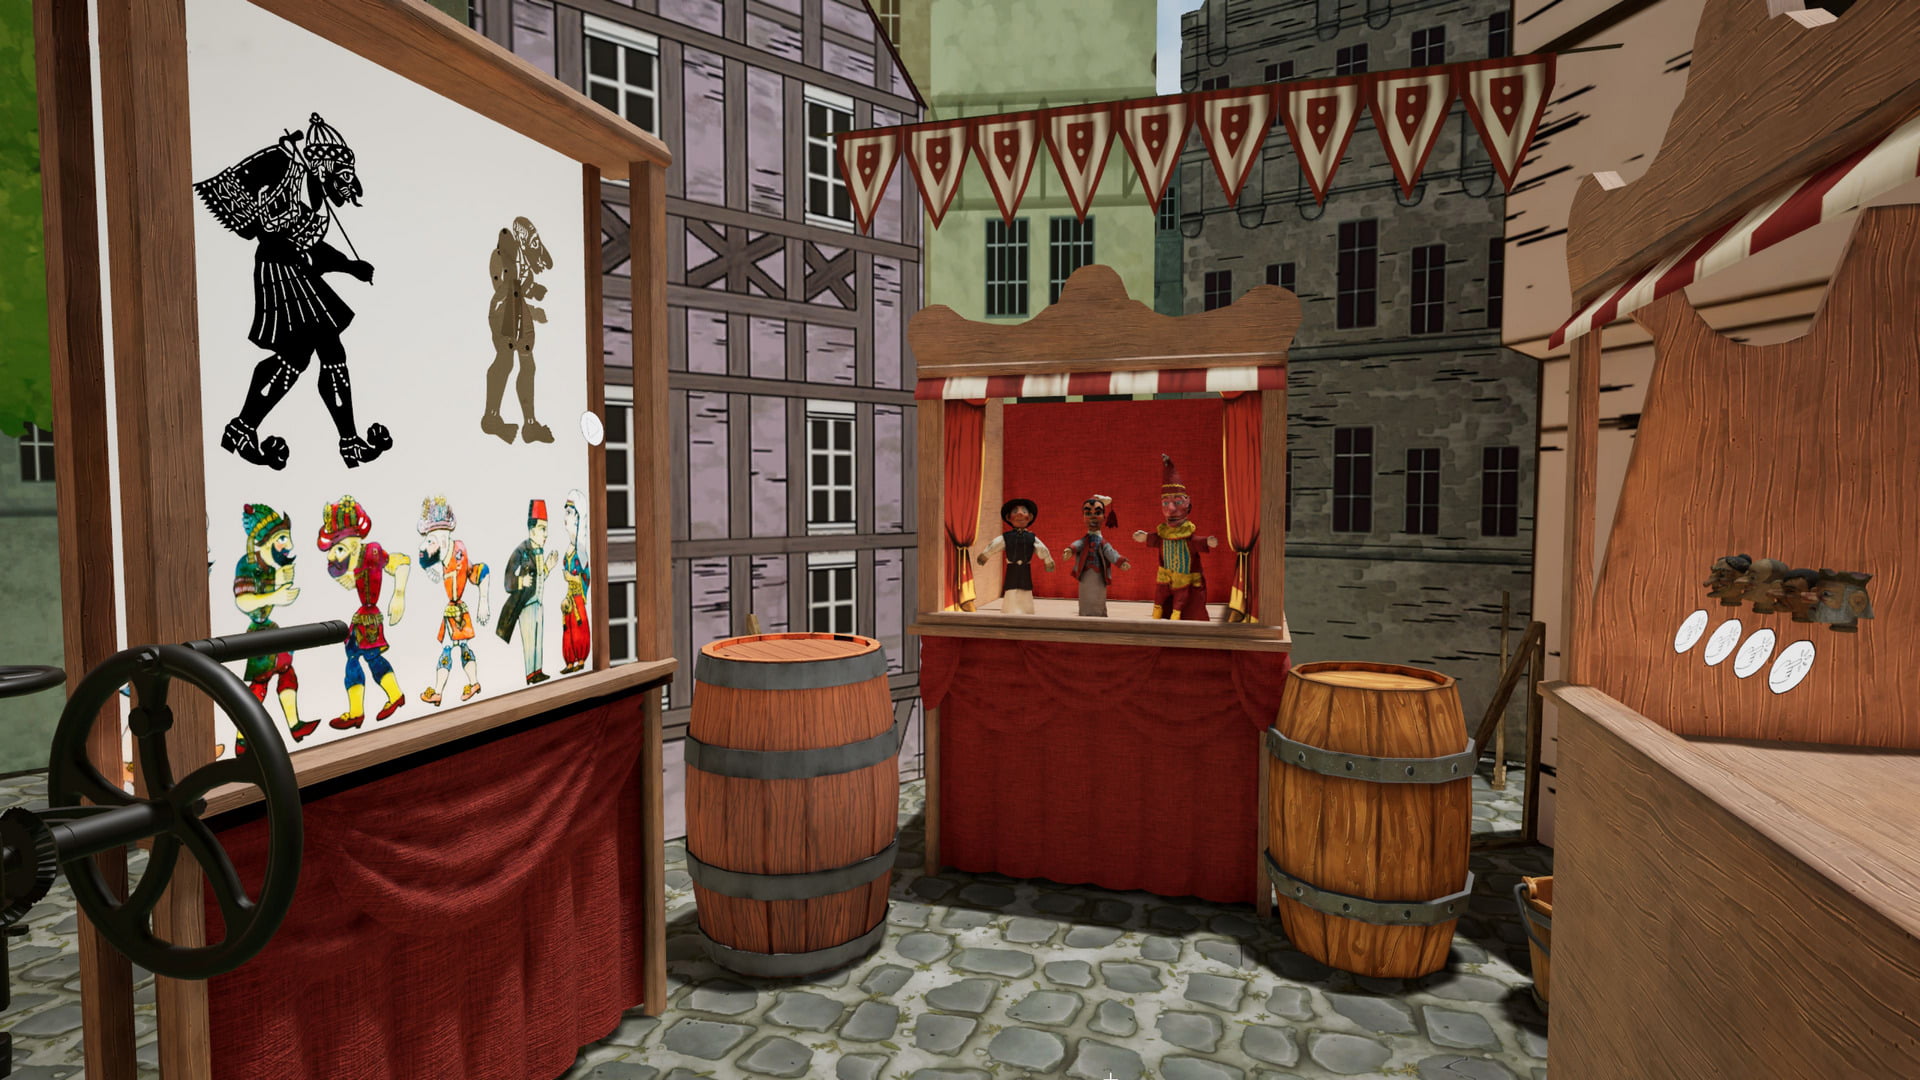 VR experience “Puppets 4.0” takes you into puppet theater